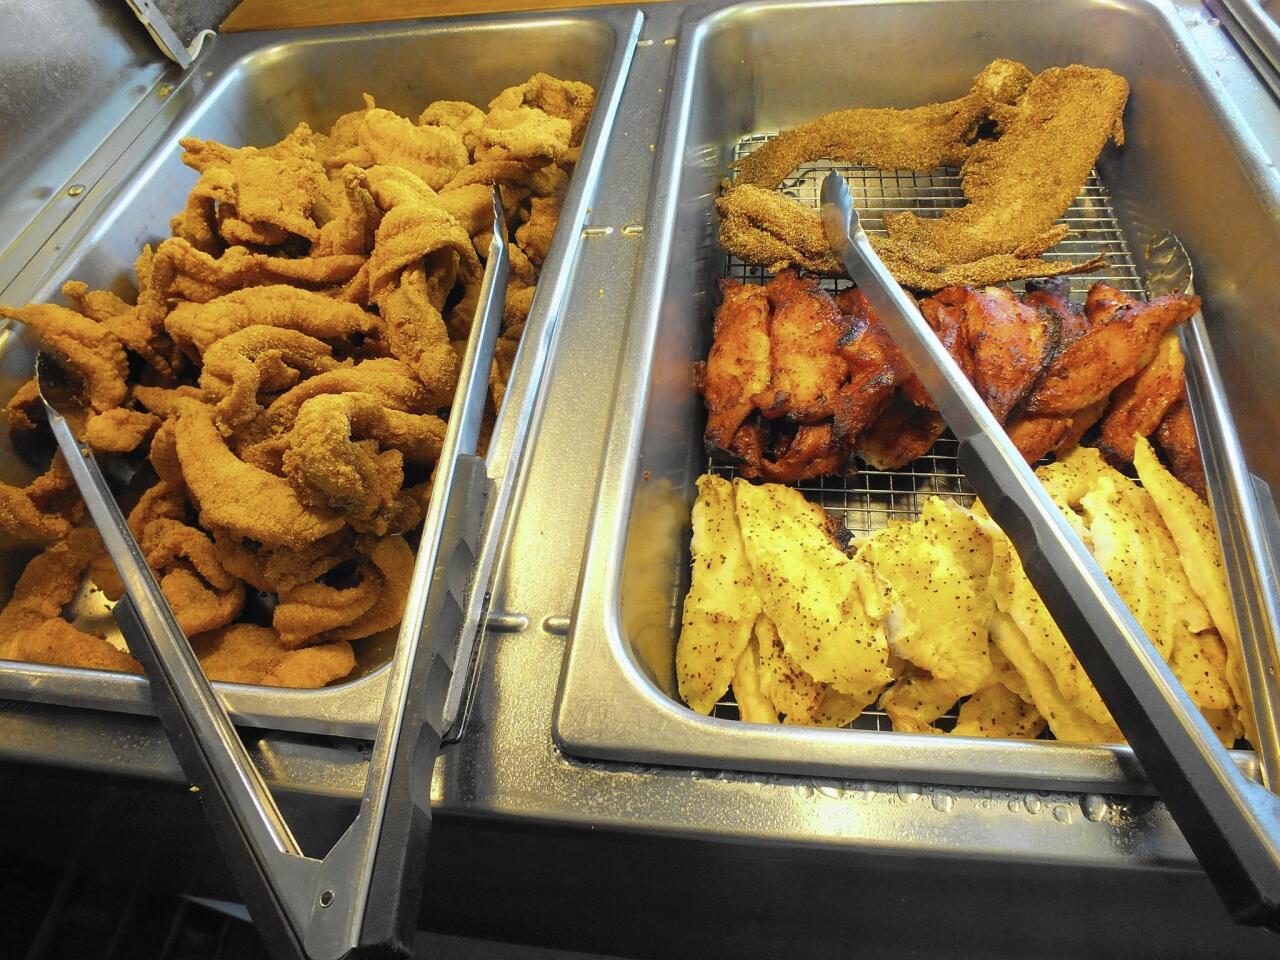 Four kinds of locally raised catfish are served at Larry's Fish House. The whole fried fish, upper right, is the one owner Larry Kelly encourages visitors to try.